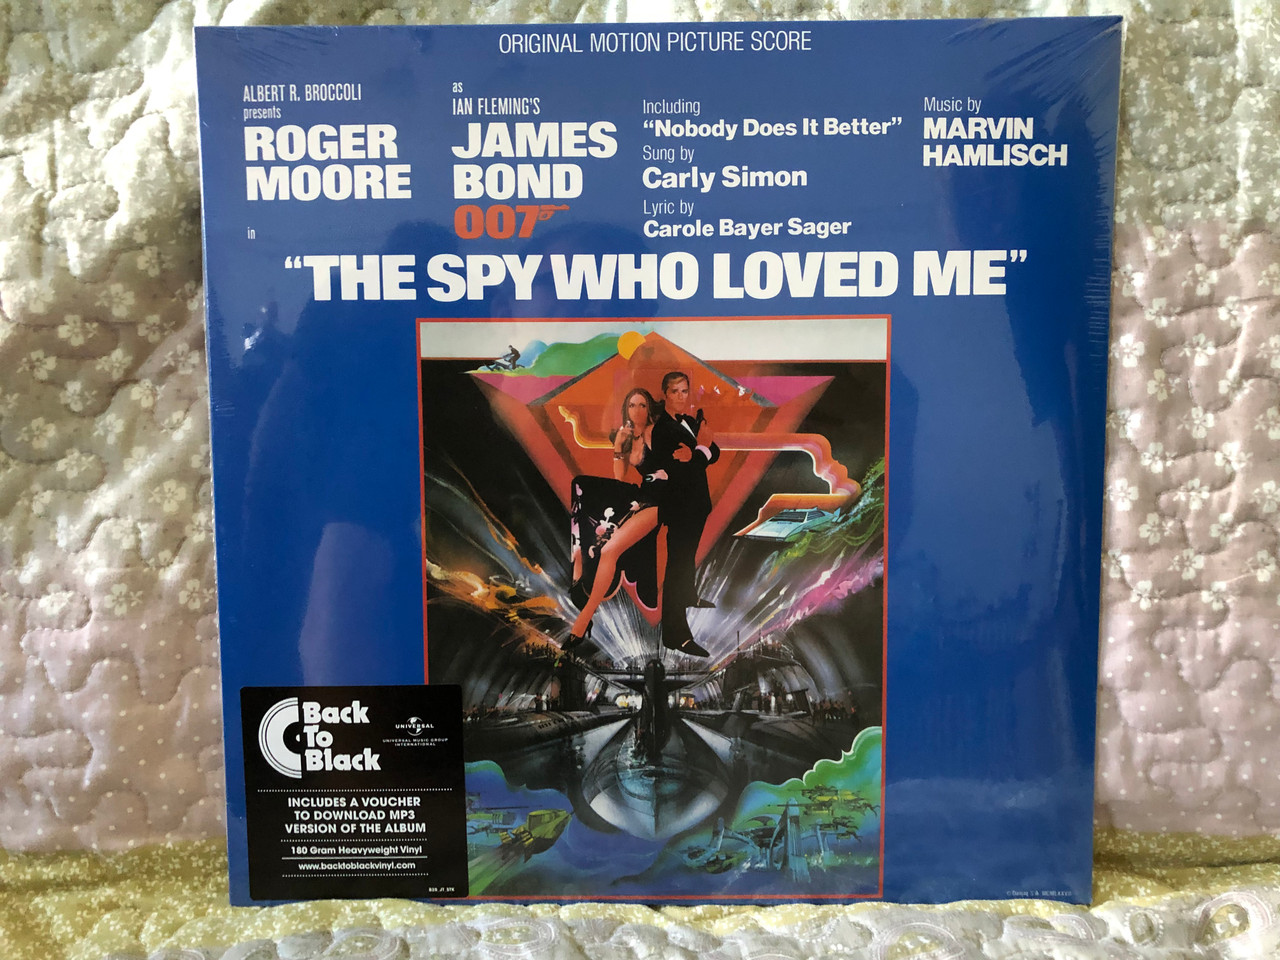 Albert R. Broccoli Presents Roger Moore in ''The Spy Who Loved Me'' as Ian